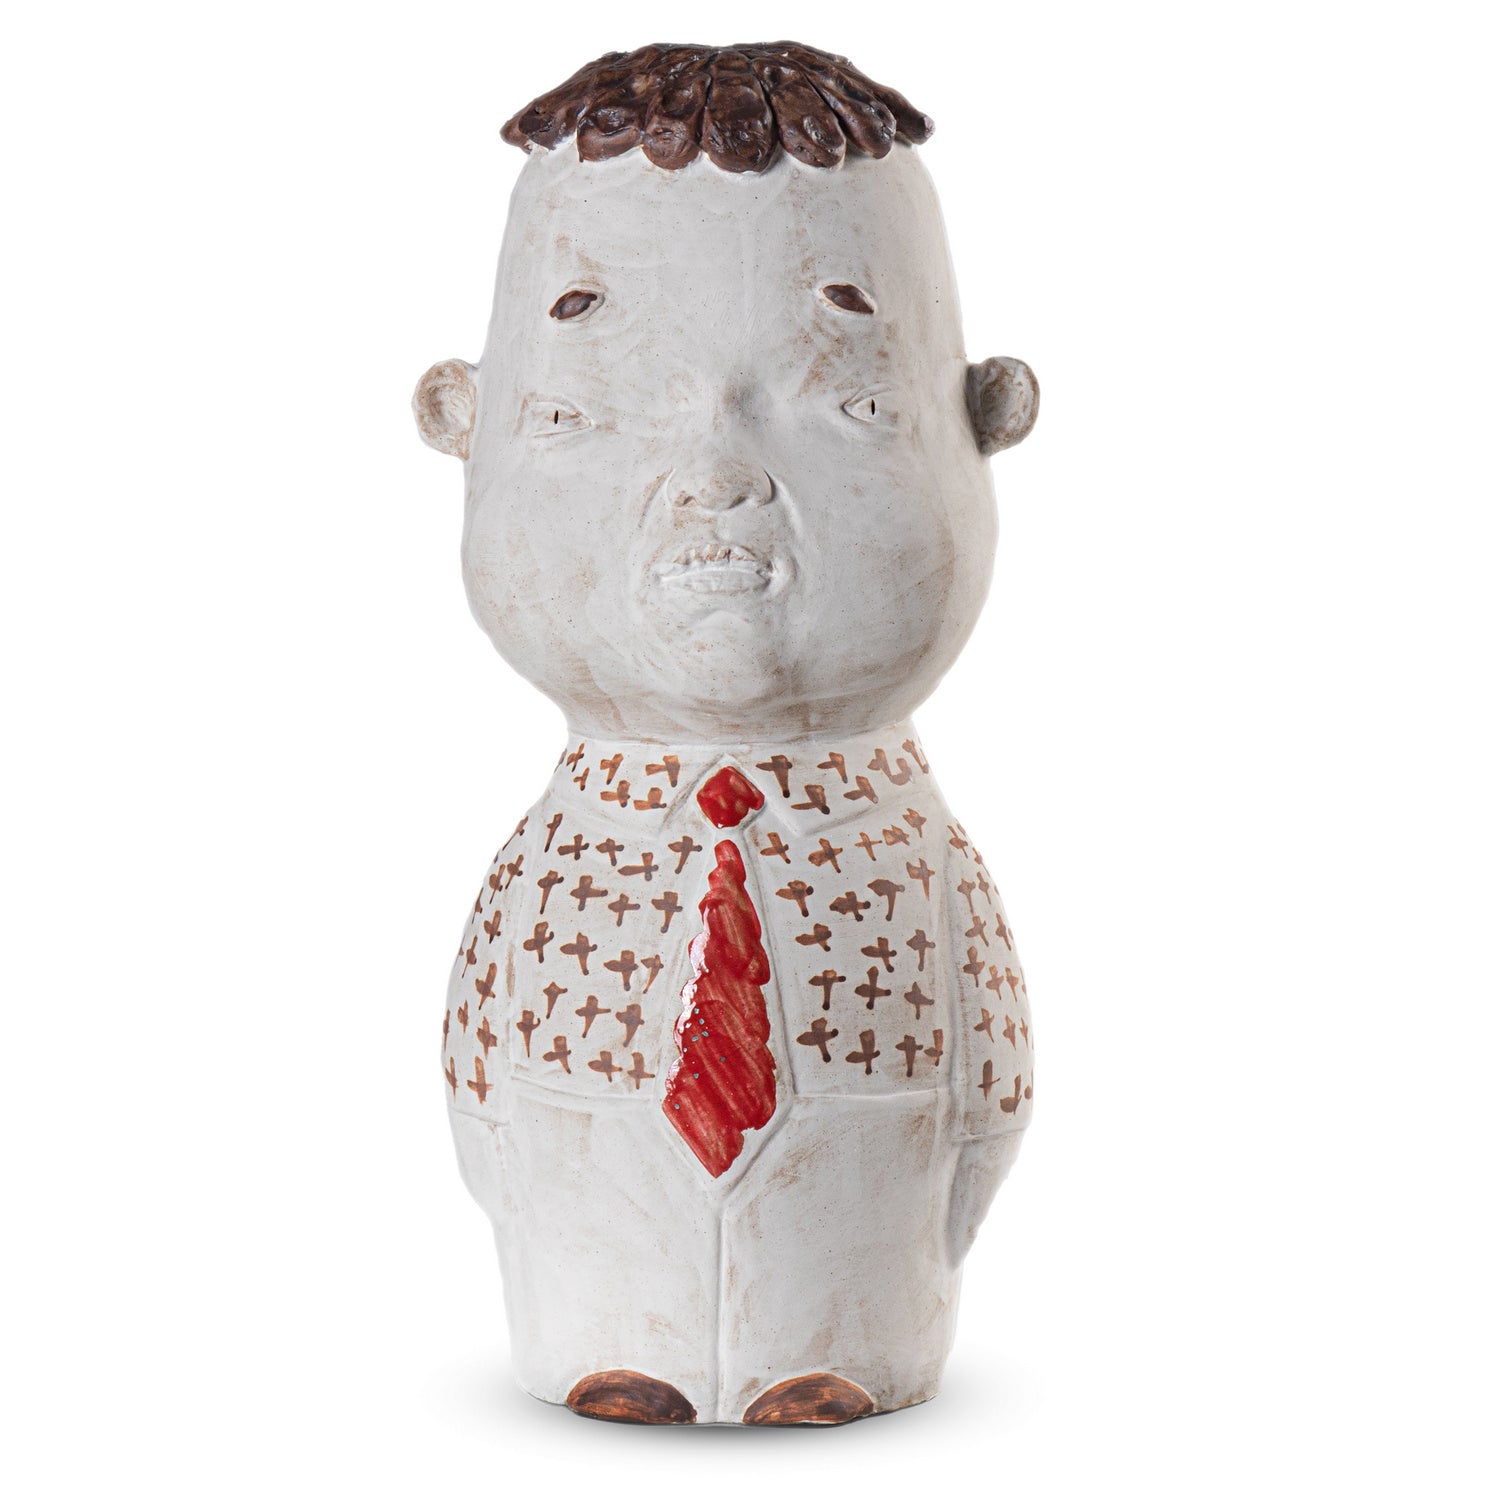 Businessman from the Successful collection in White/Brown/Red finish